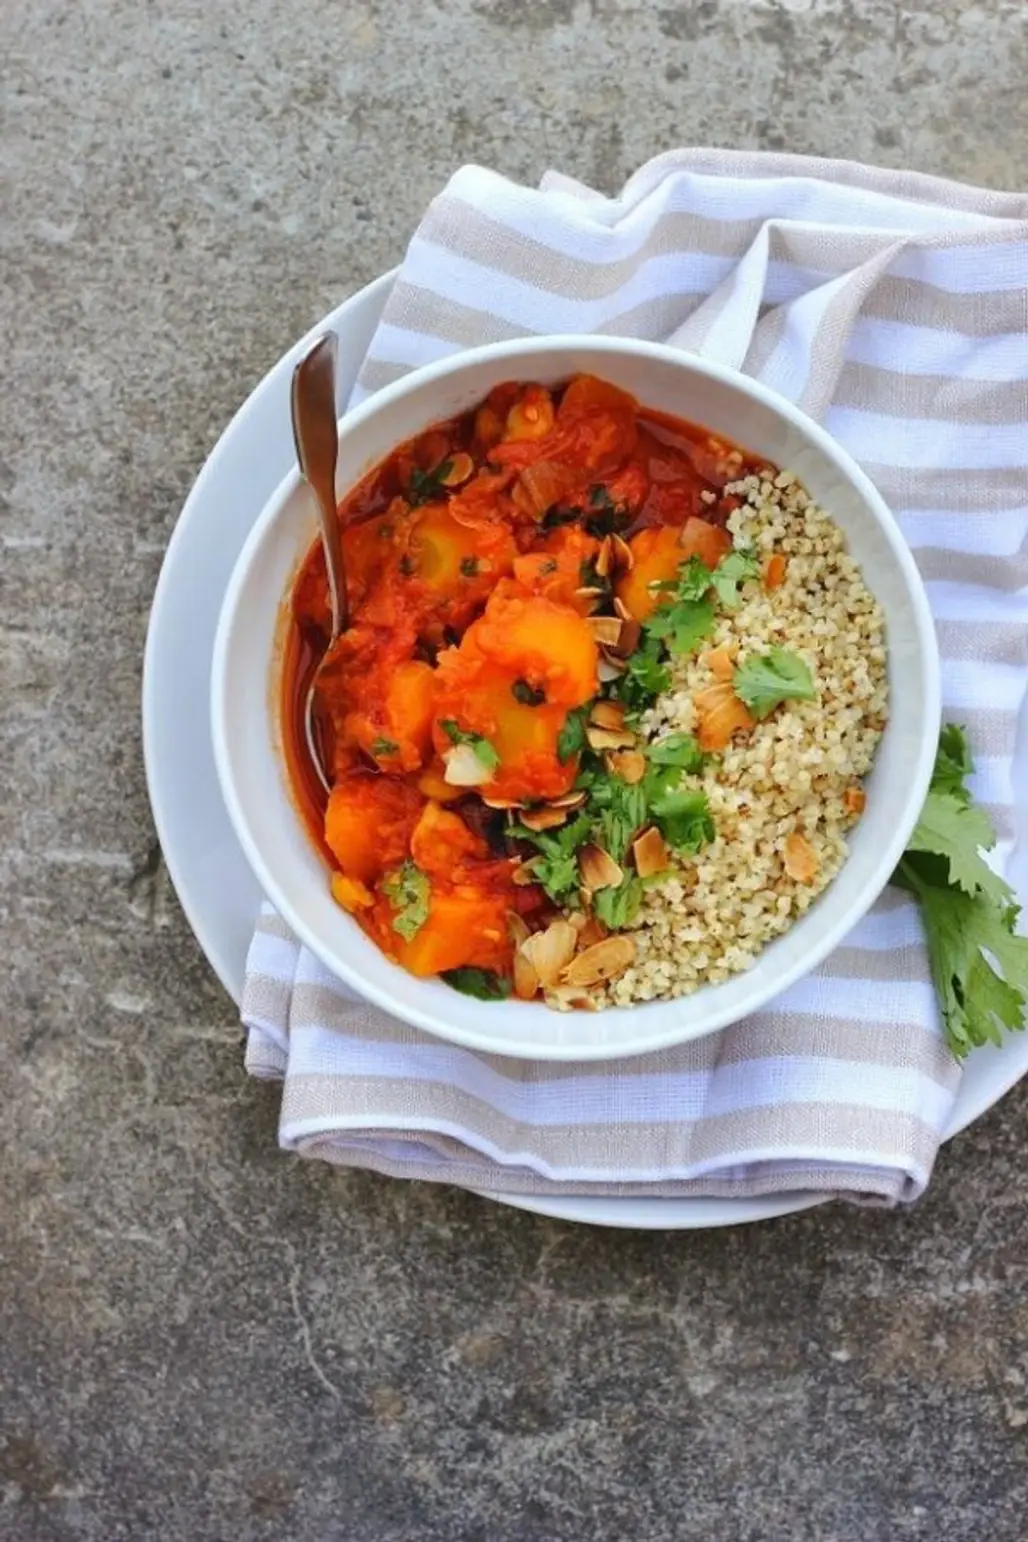 Moroccan Spiced Pumpkin and Chickpea Stew